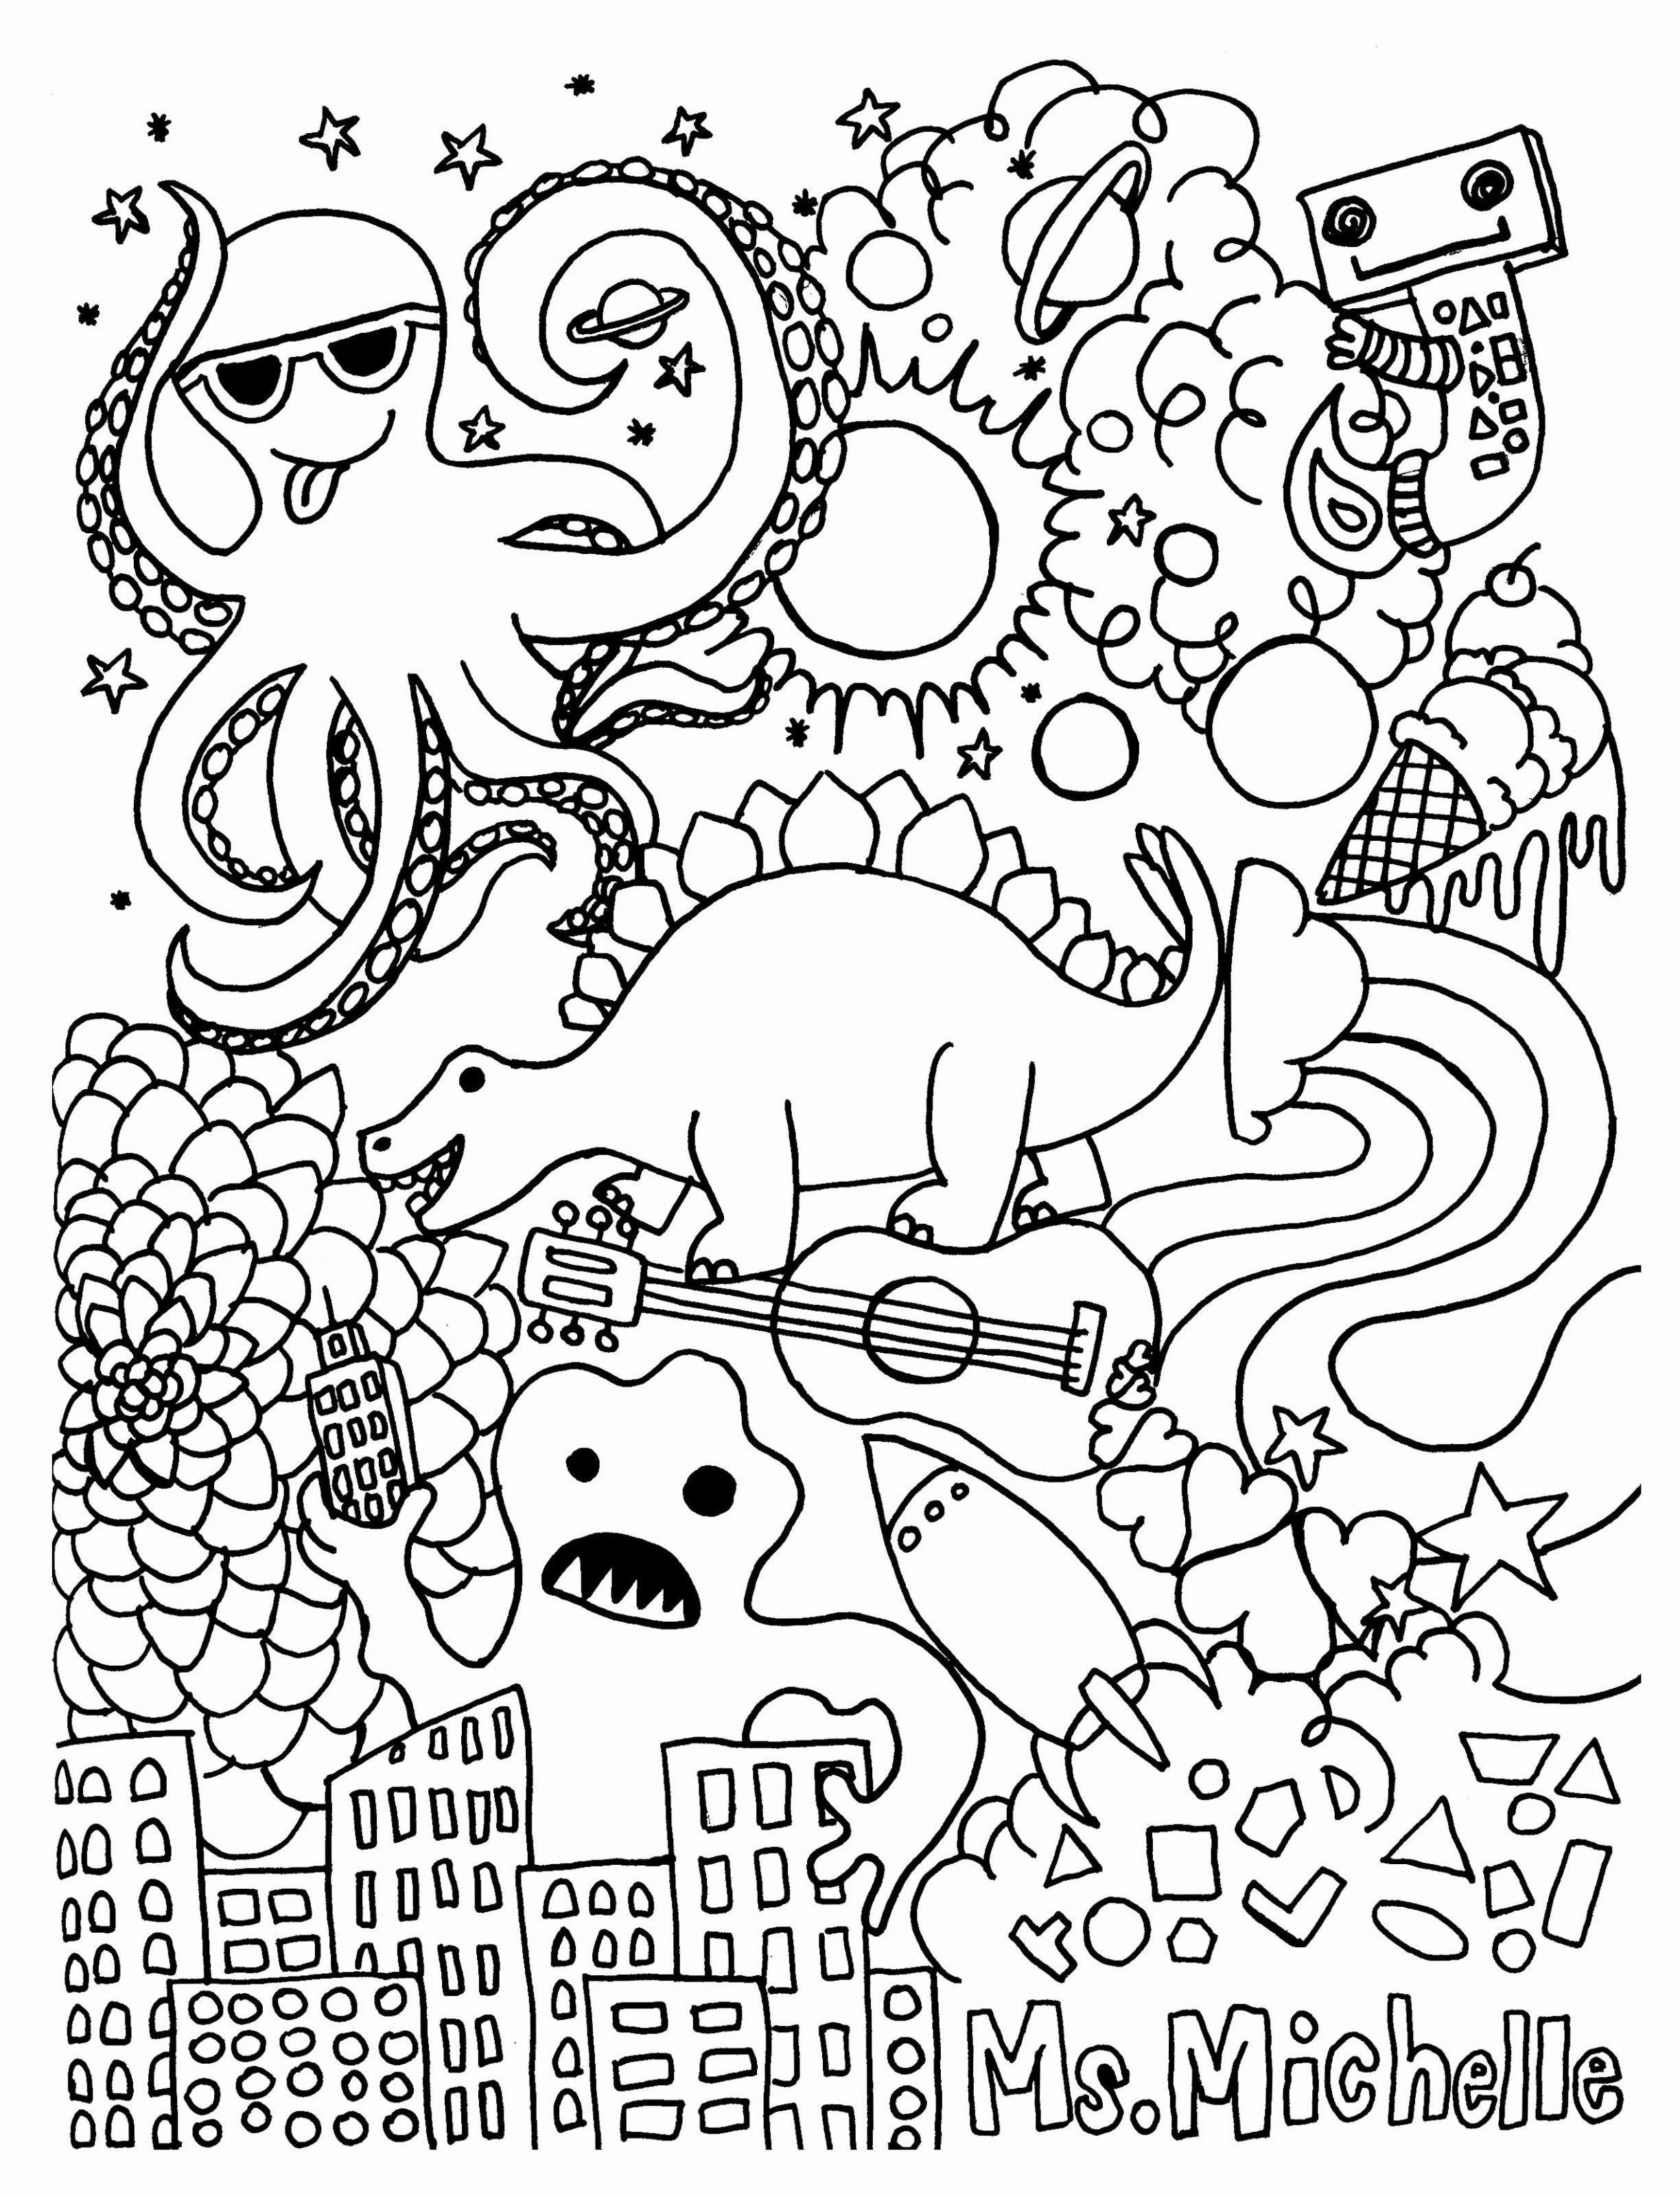 South Park Coloring Page Coloring Pages And Books 41 School Coloring Page Picture Ideas Ike